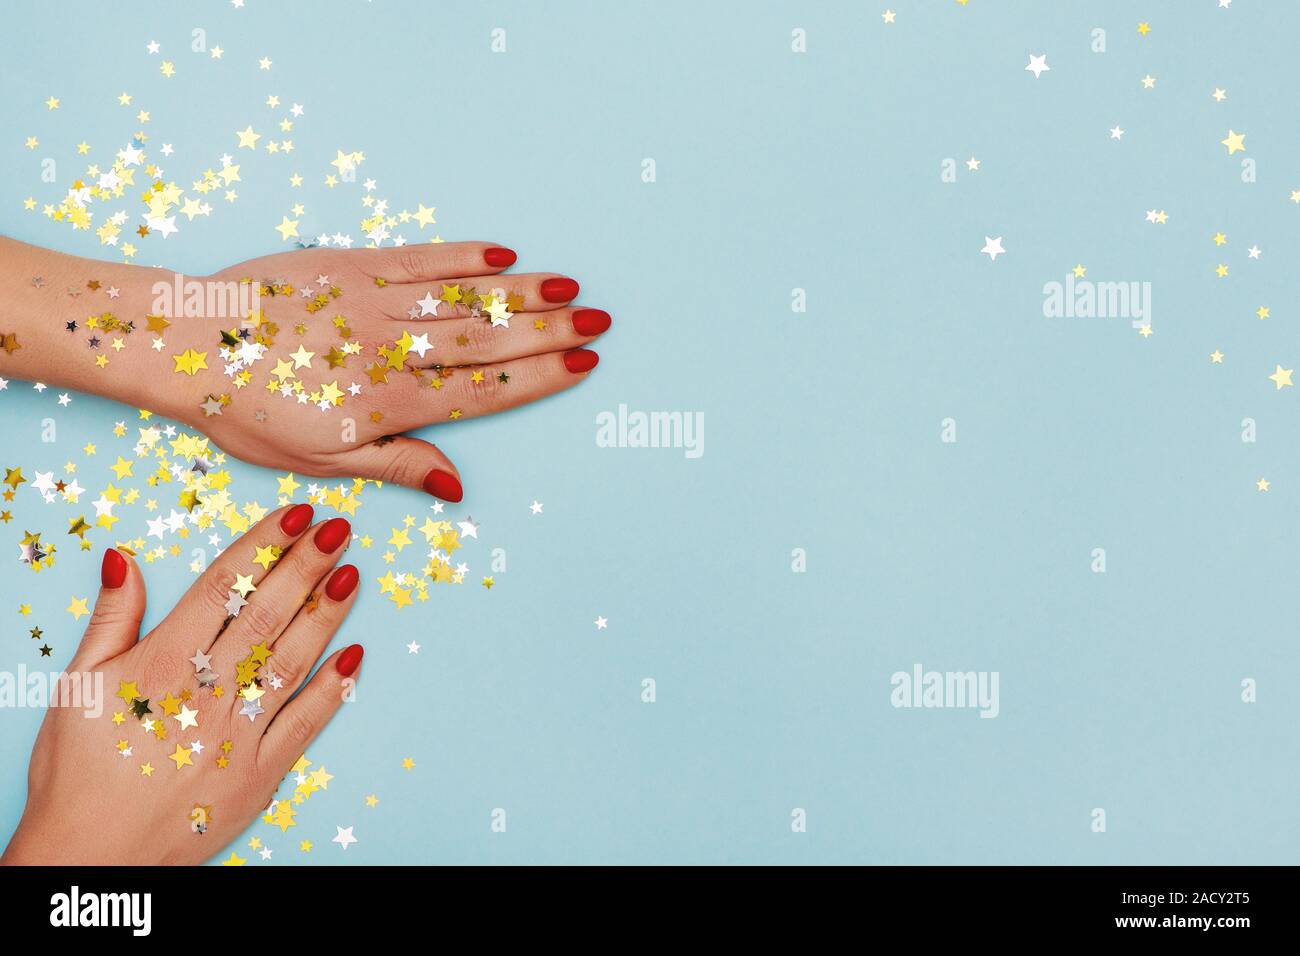 Woman hands with red manicure on blue background with golden stars sprinkles. Holiday, party and Christmas concept. Stock Photo